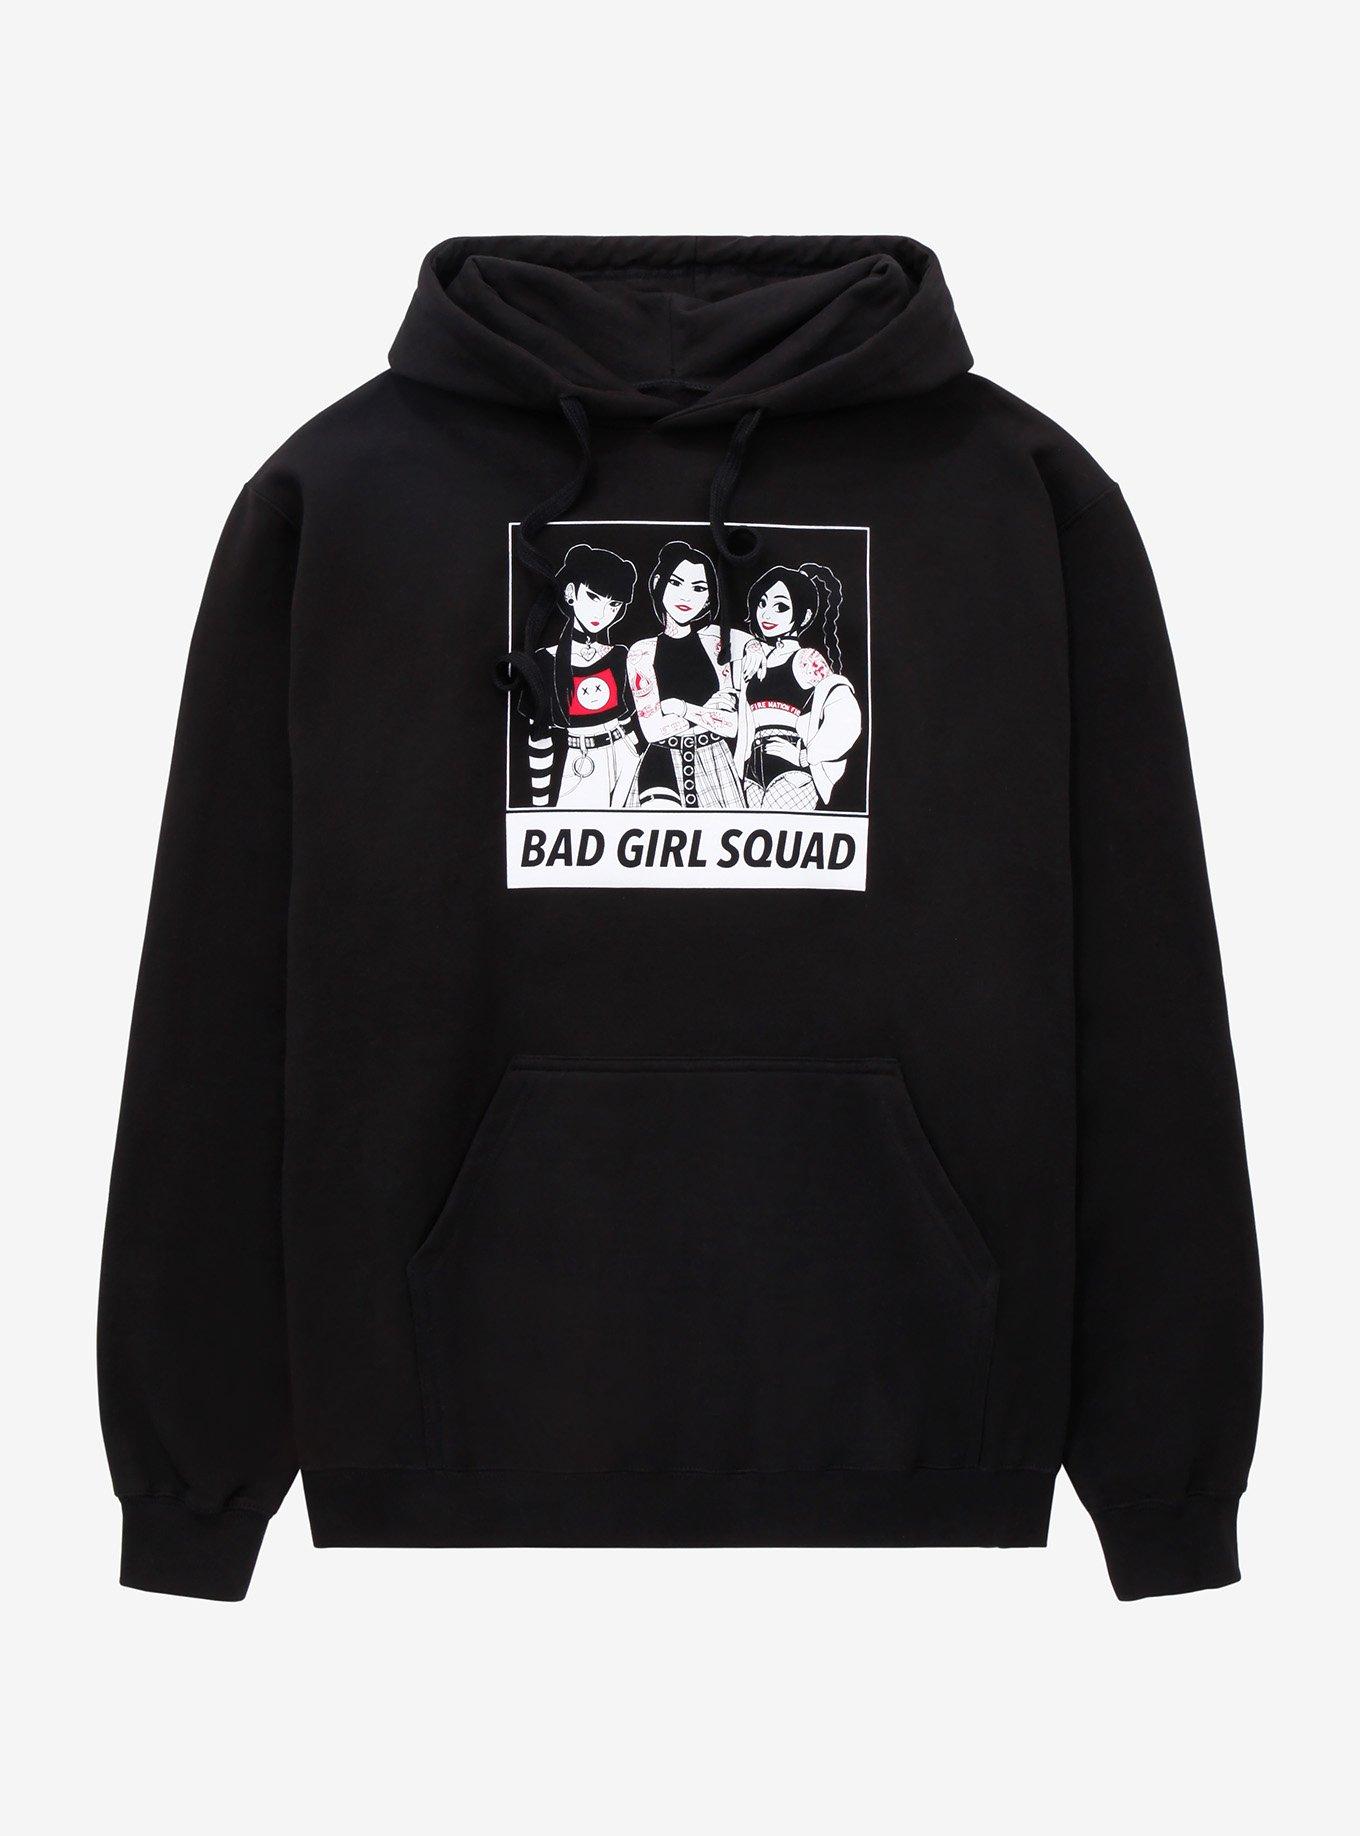 Avatar: The Last Airbender Bad Girl Squad Hoodie - BoxLunch Exclusive, BLACK, hi-res